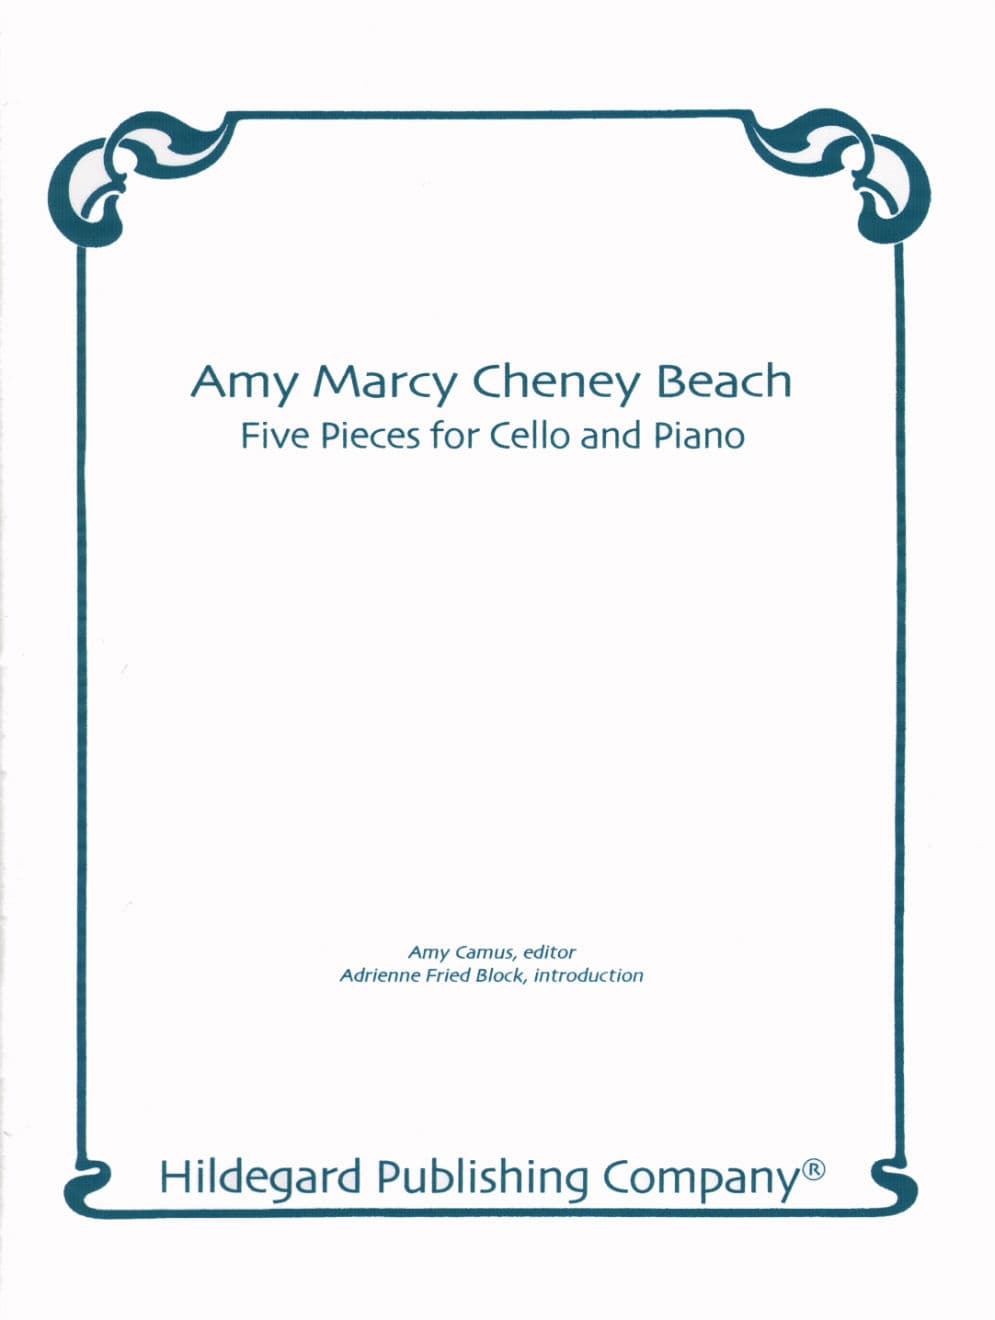 Beach, Amy - Five Pieces for Cello and Piano Op 15, 40, 151 - Hildegard Publishing